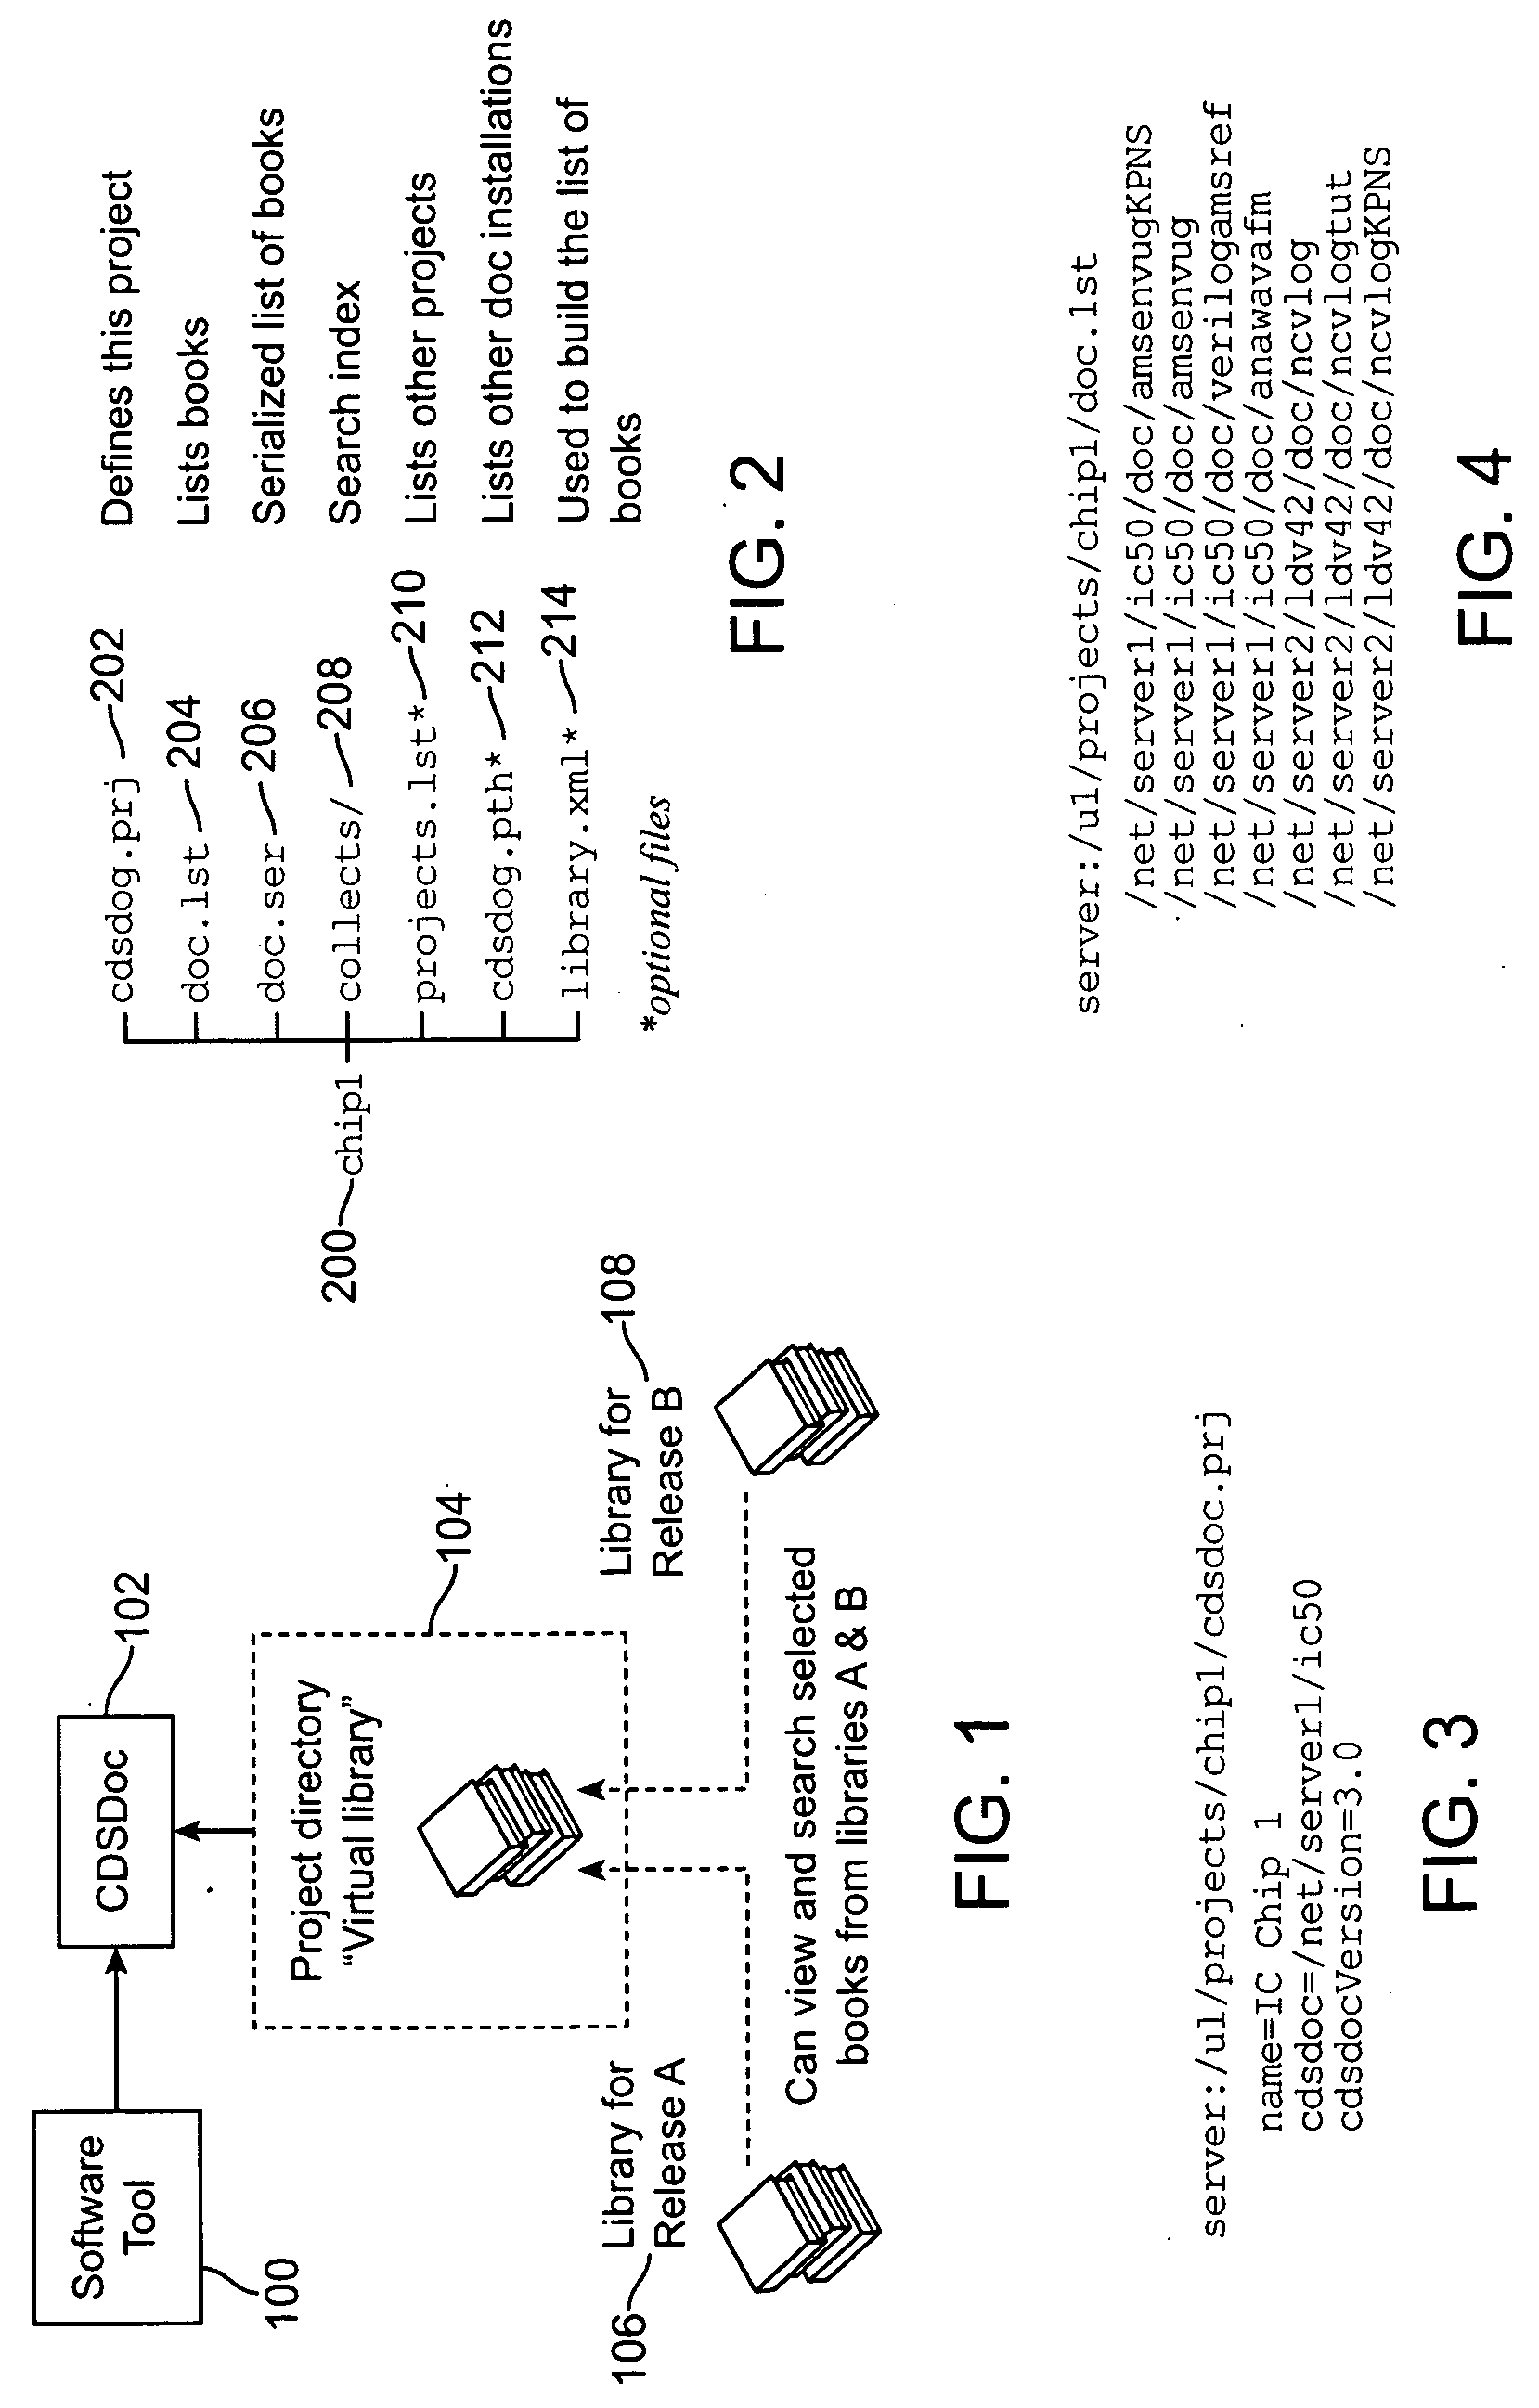 Method and system for enhancing software documentation and help systems